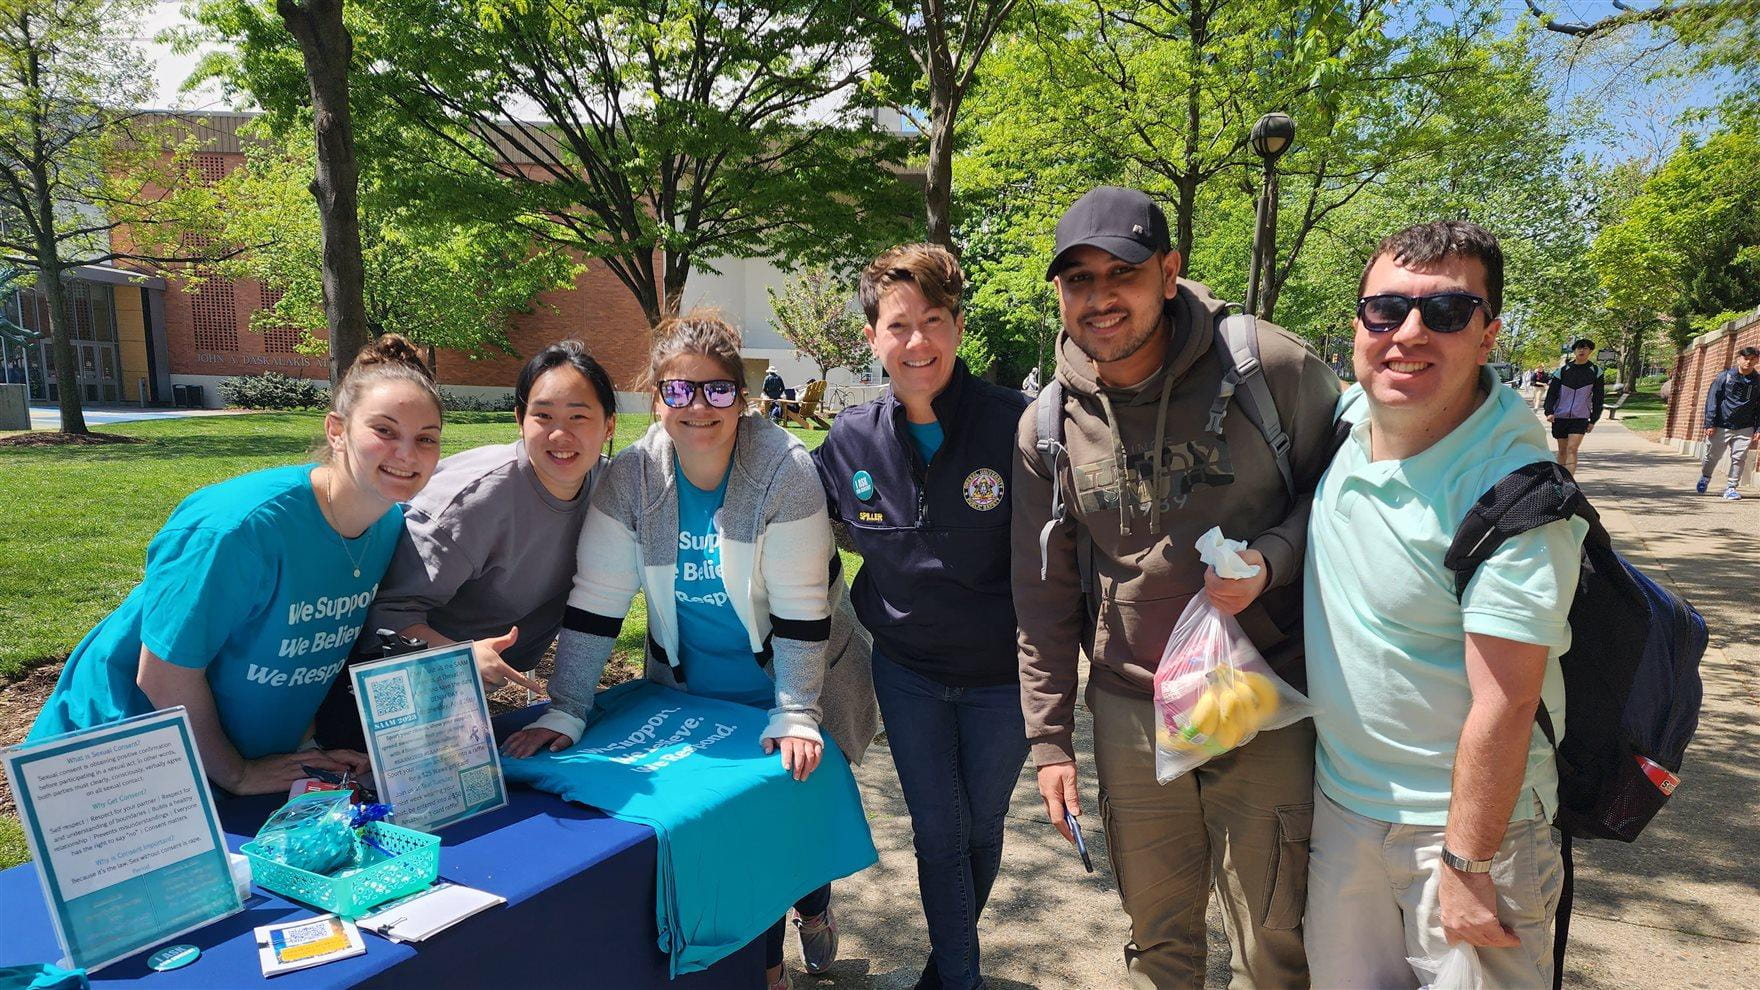 Victim Services Coordinator Amy Spiller posing with students and staff at Teal Tuesday, an event held for Sexual Assault Awareness Month on Drexel’s campus